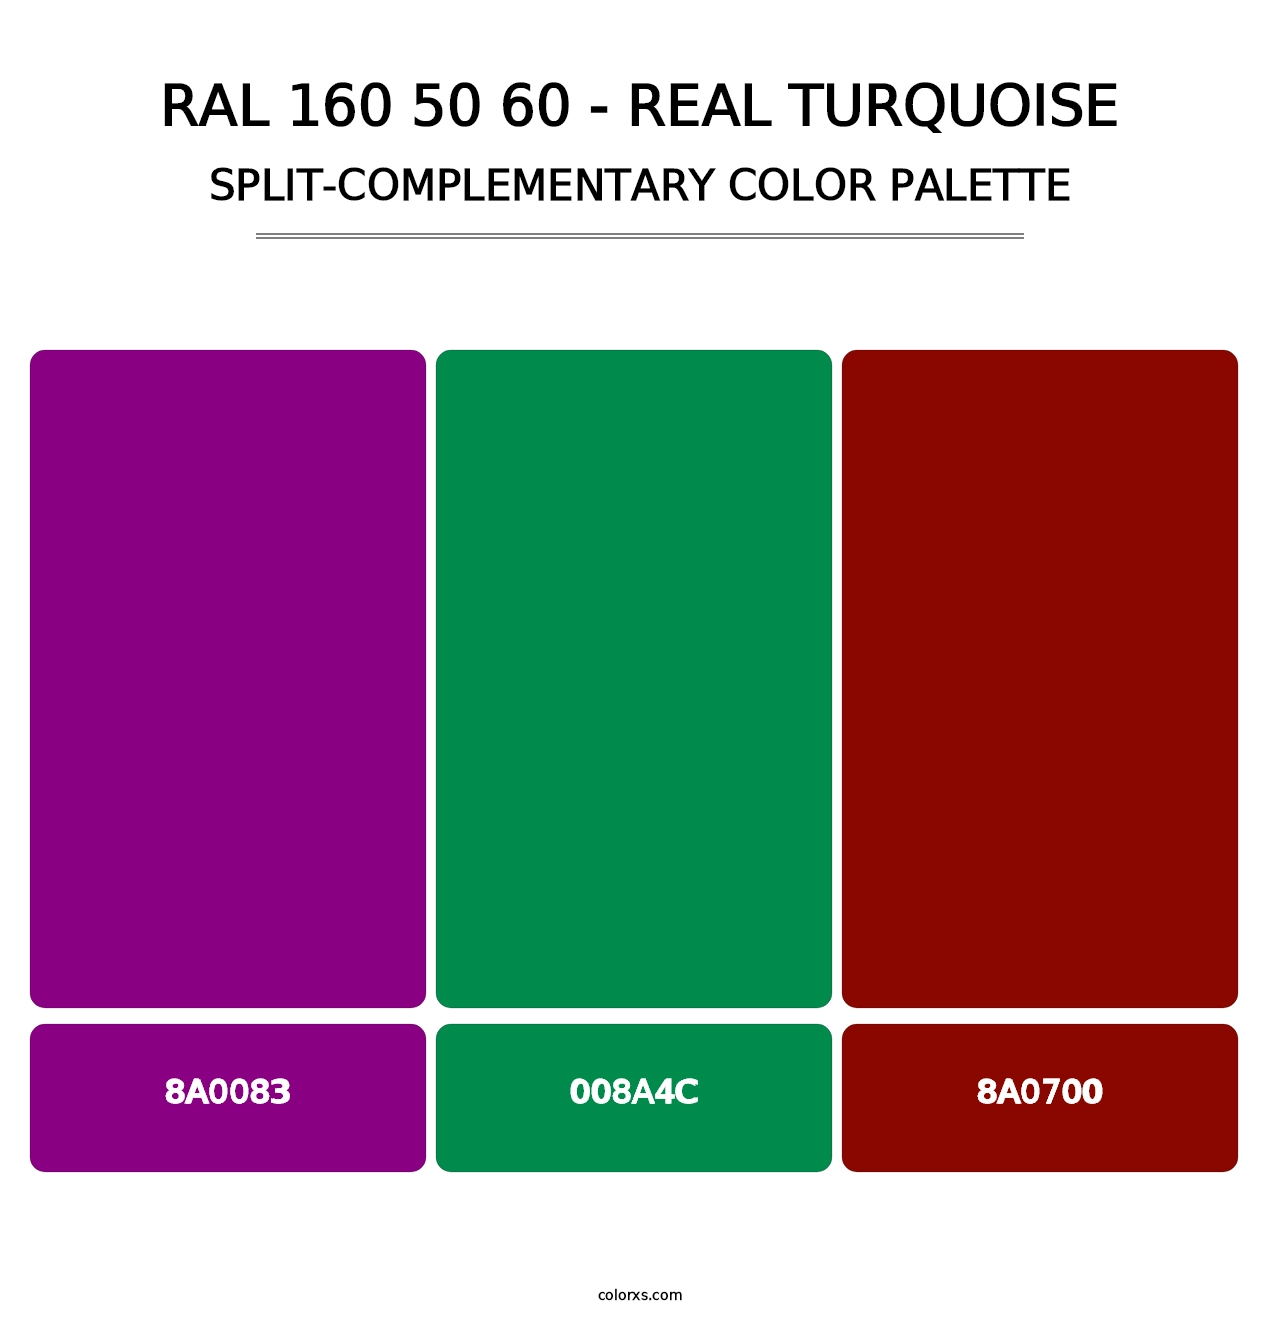 RAL 160 50 60 - Real Turquoise - Split-Complementary Color Palette